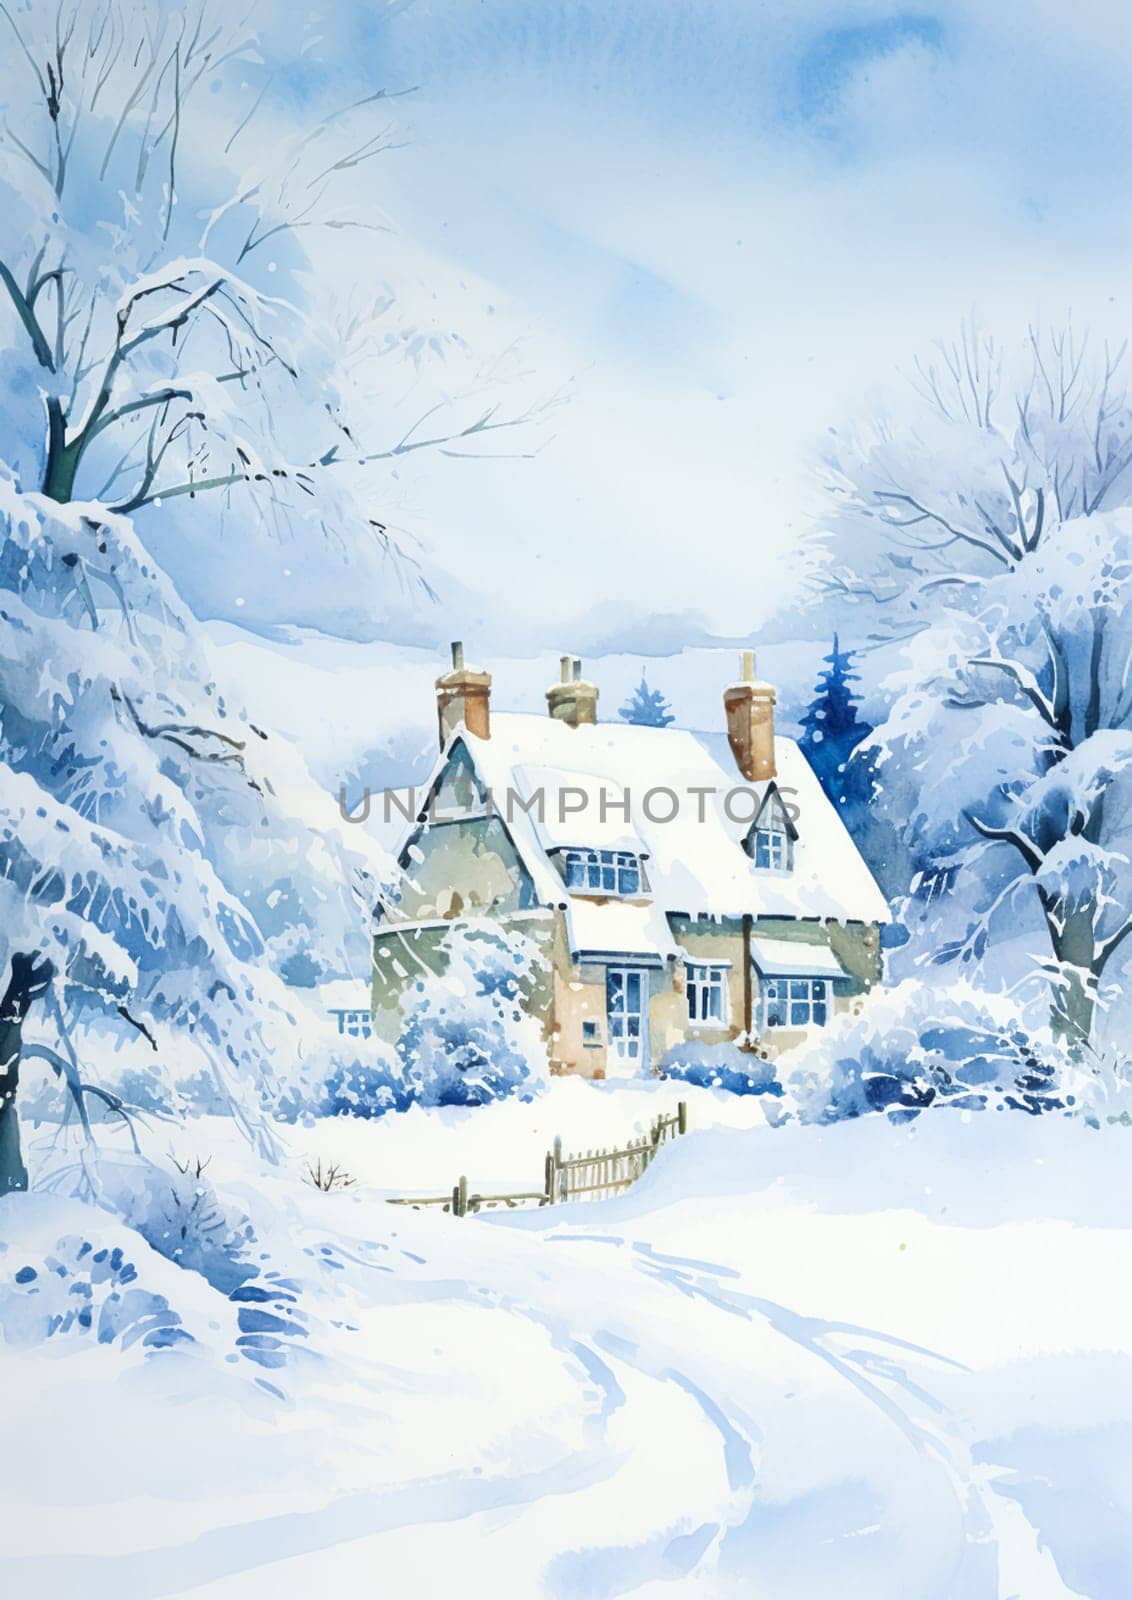 Merry Christmas and Happy Holidays, watercolour printable art print, English countryside cottage as snow winter holiday Christmas card, thank you and diy greeting card design, country style idea